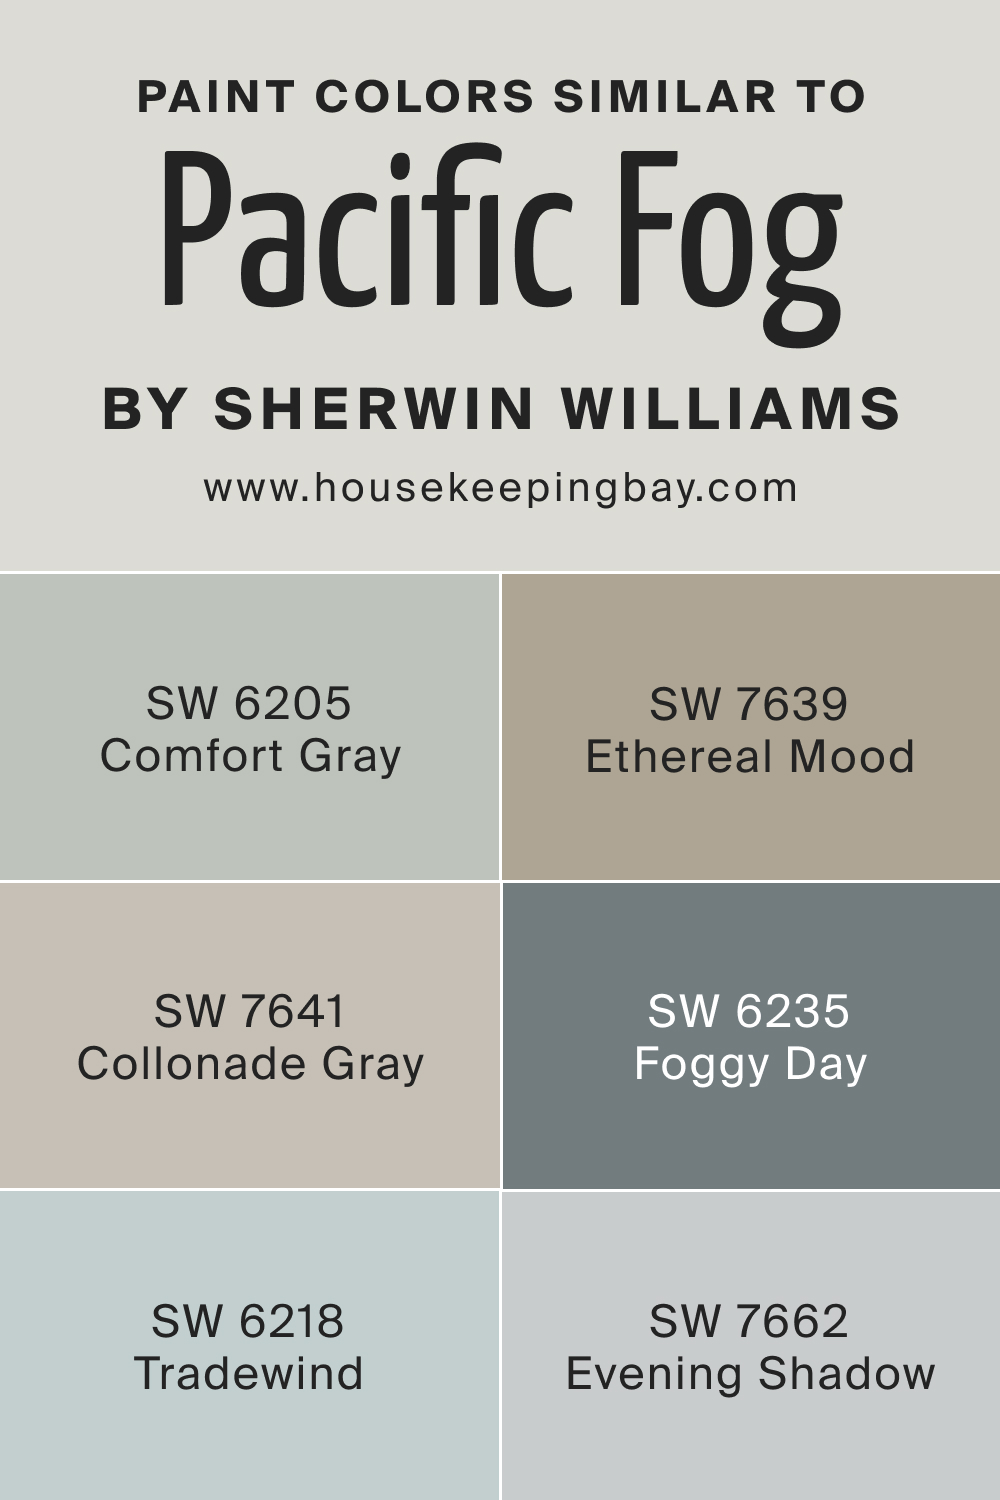 Paint Color Similar to SW 9627 Pacific Fog by Sherwin Williams